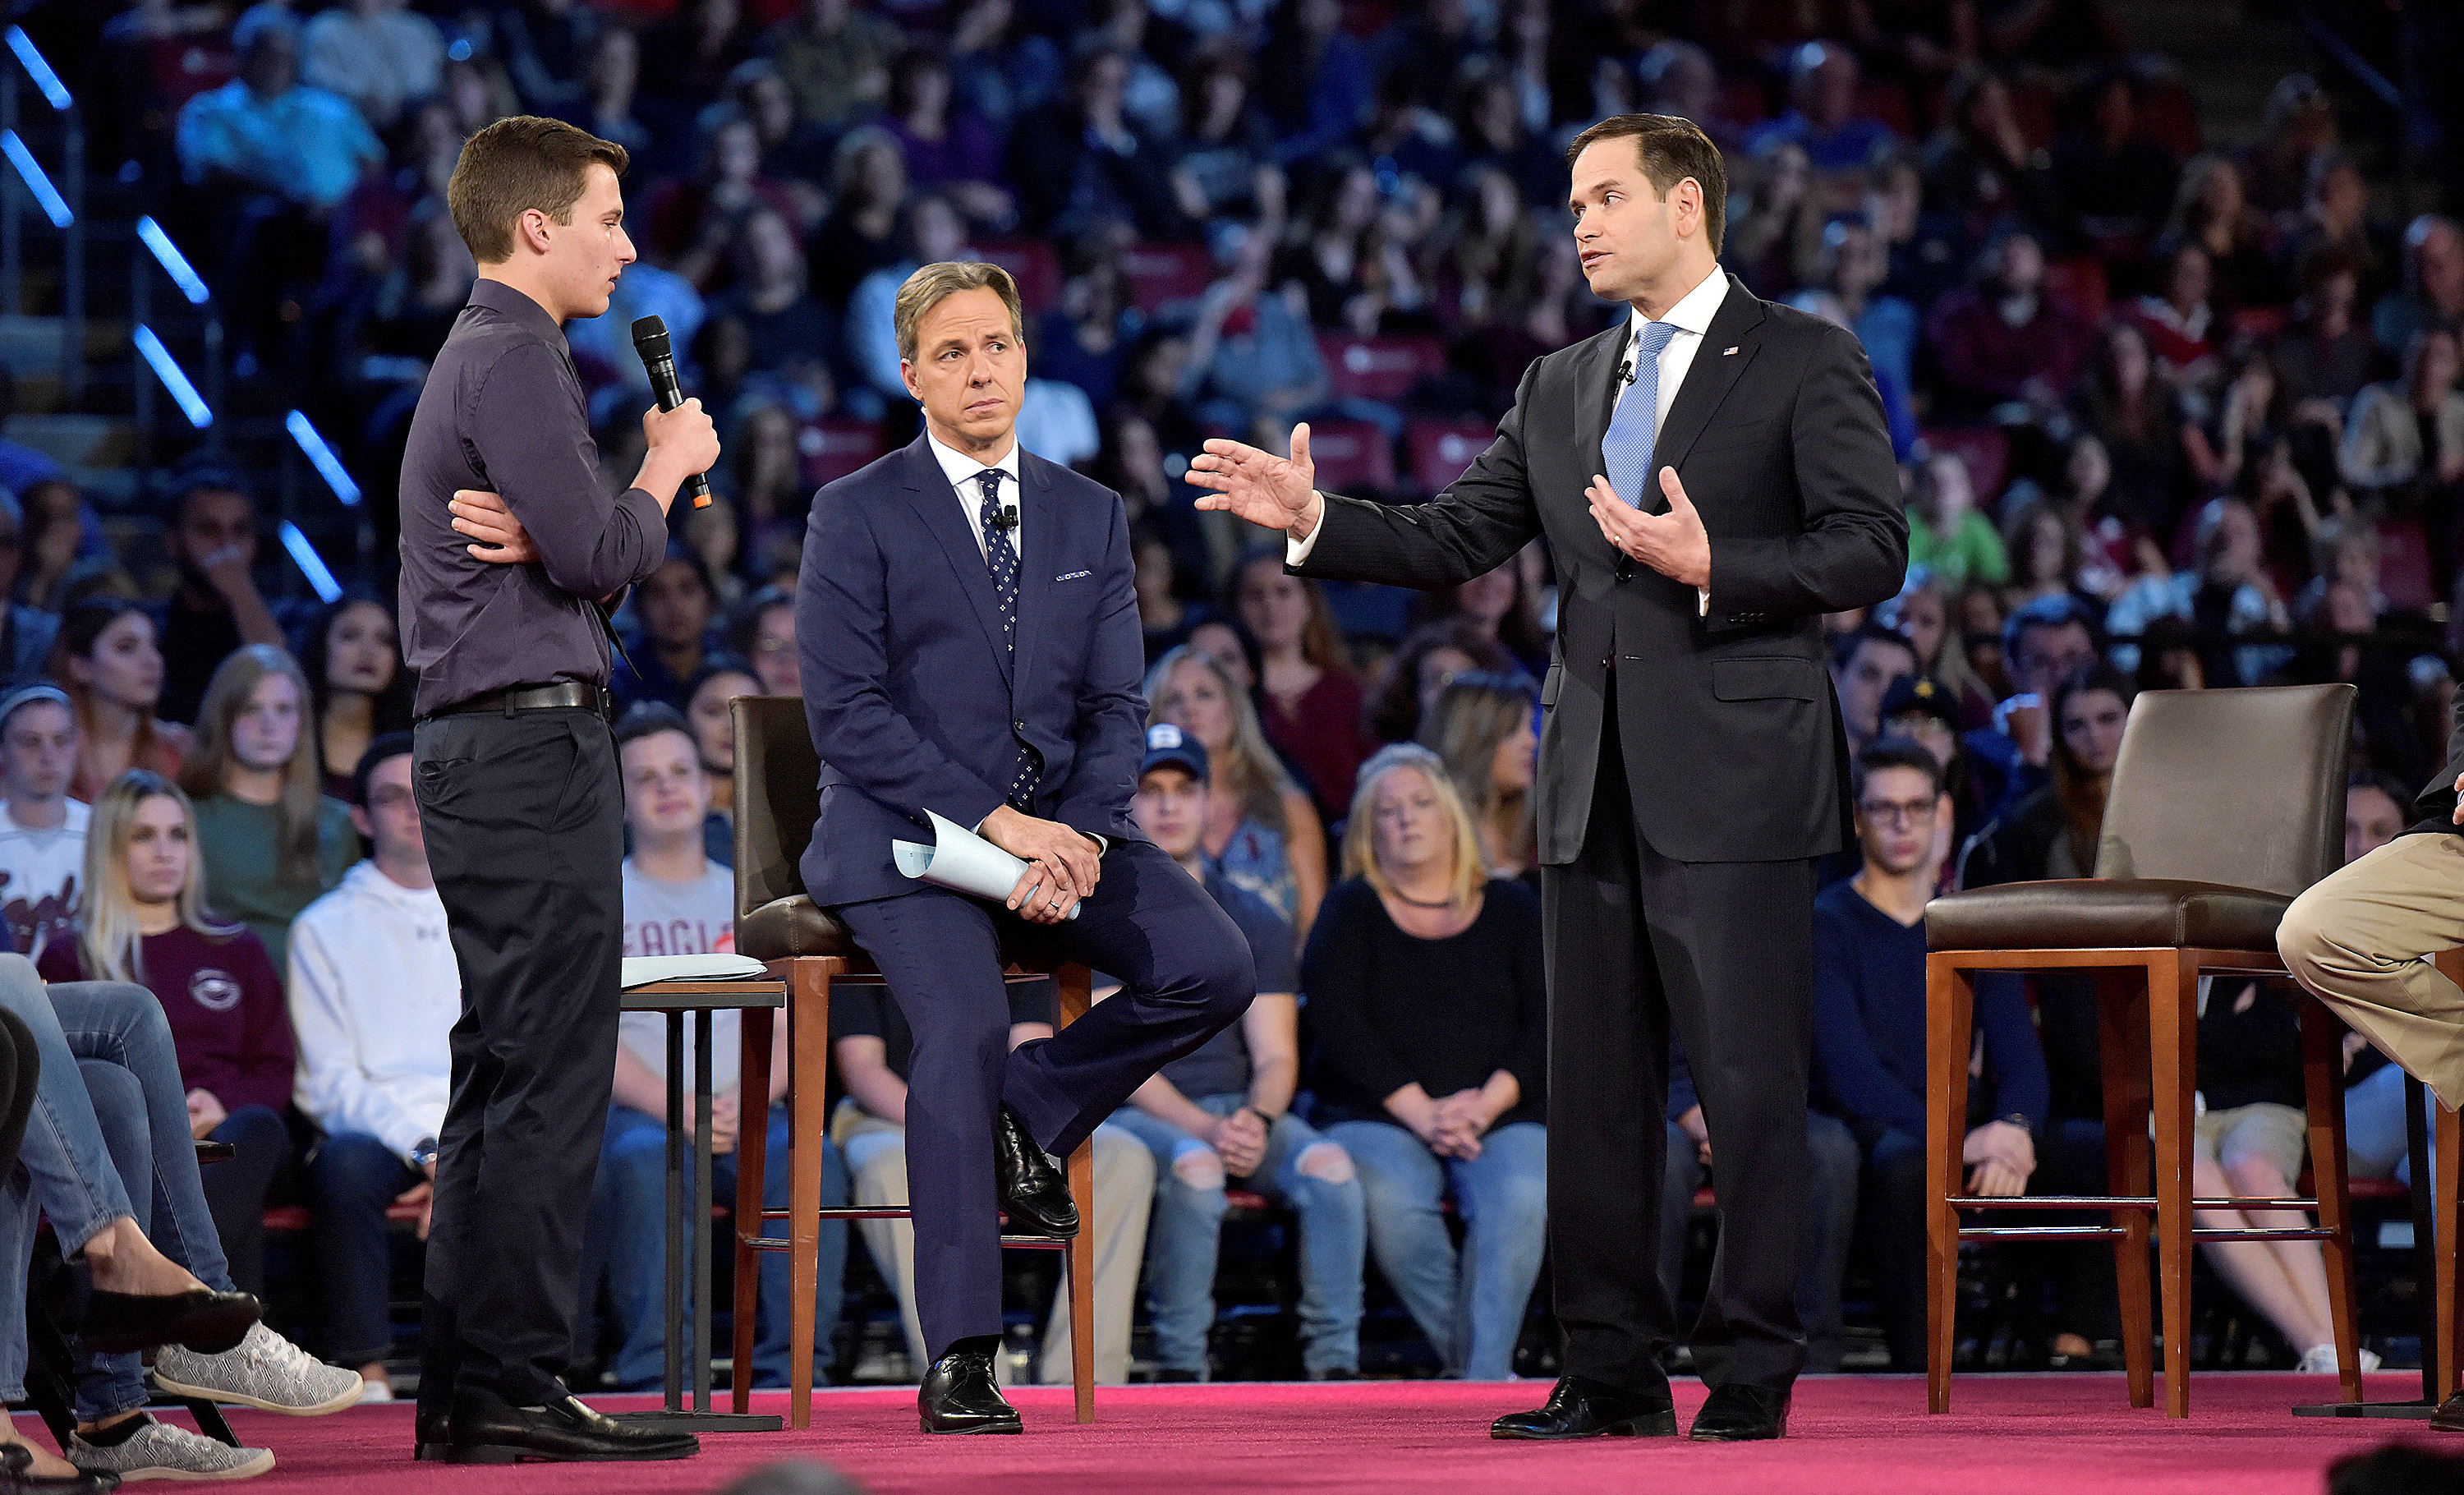 High-school shooting survivor Cameron Kasky (L) asks Senator Marco Rubio if he will continue to accept money from the NRA.